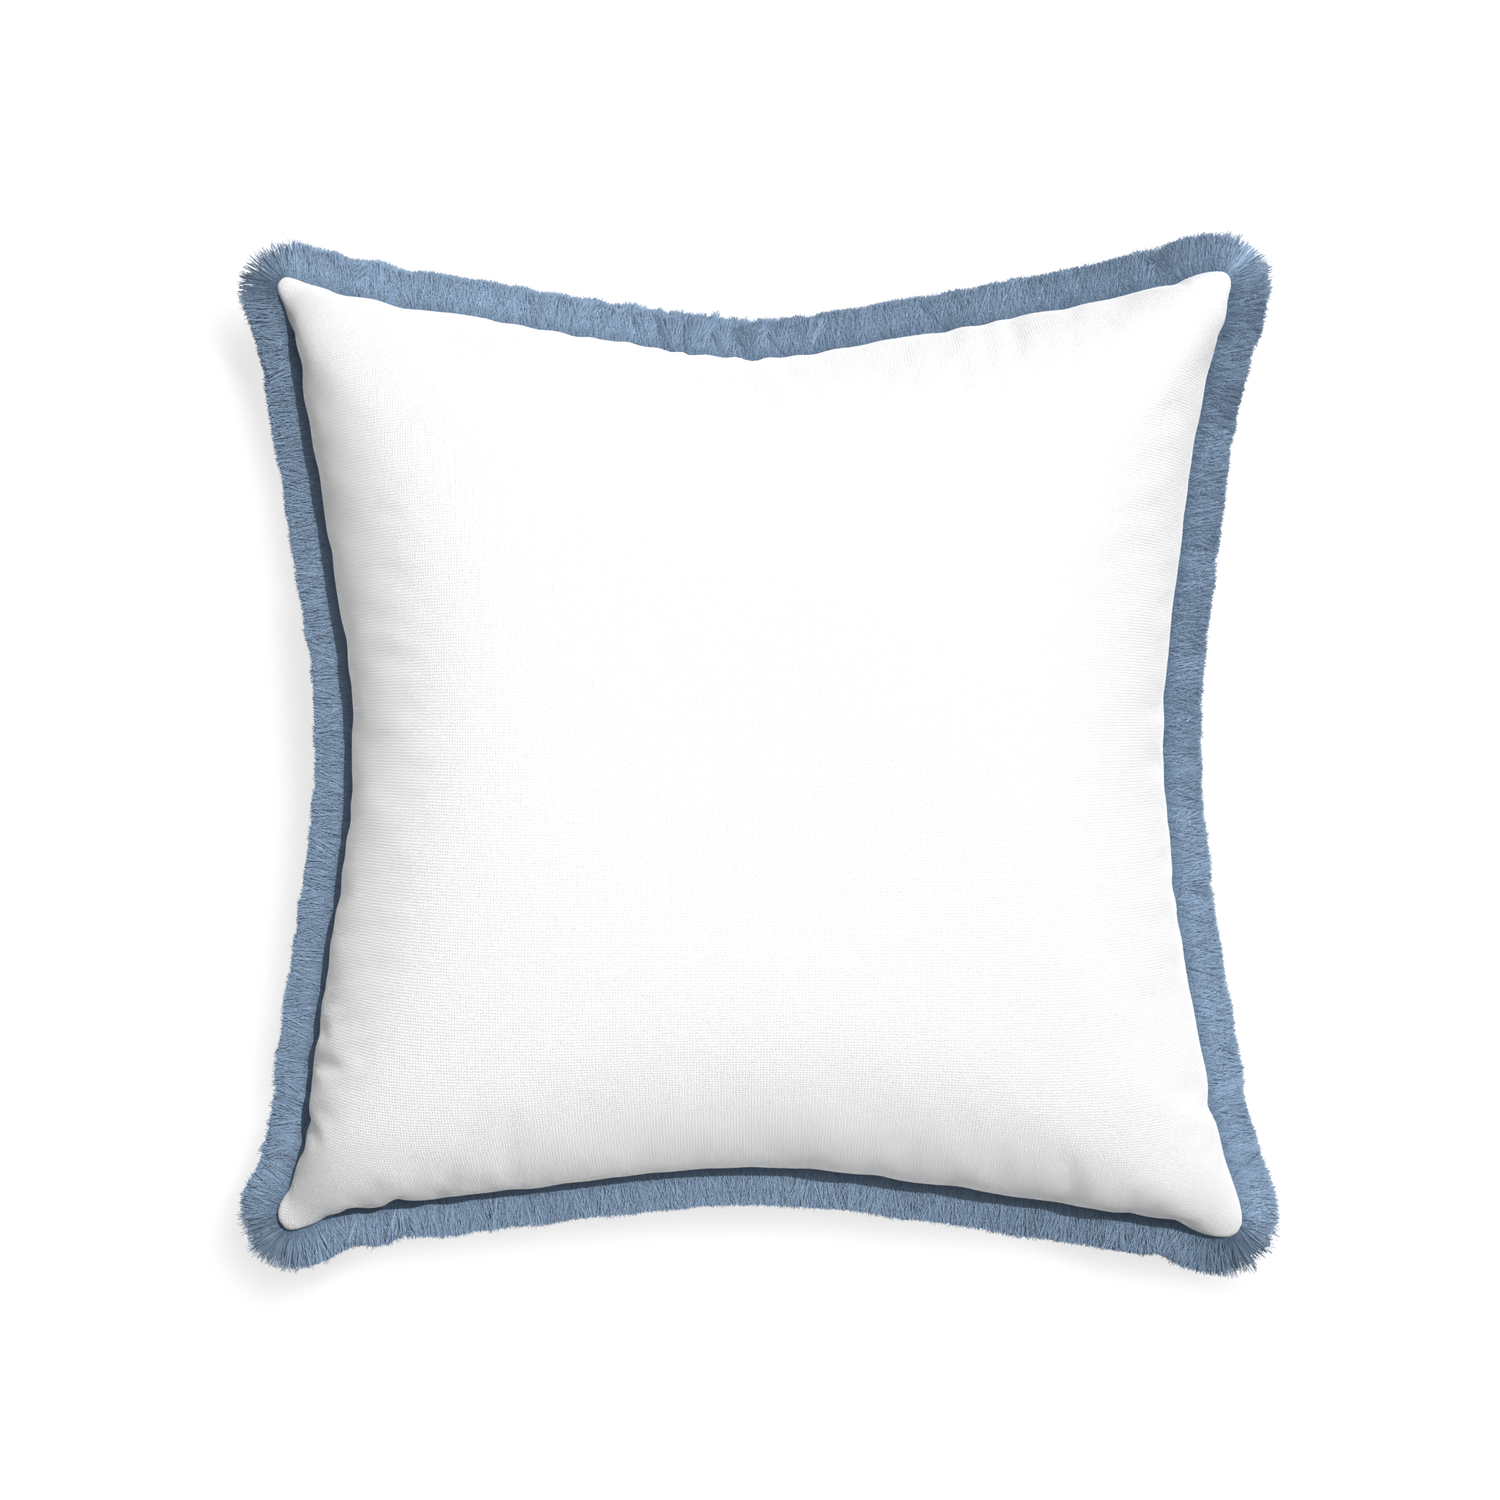 22-square snow custom pillow with sky fringe on white background